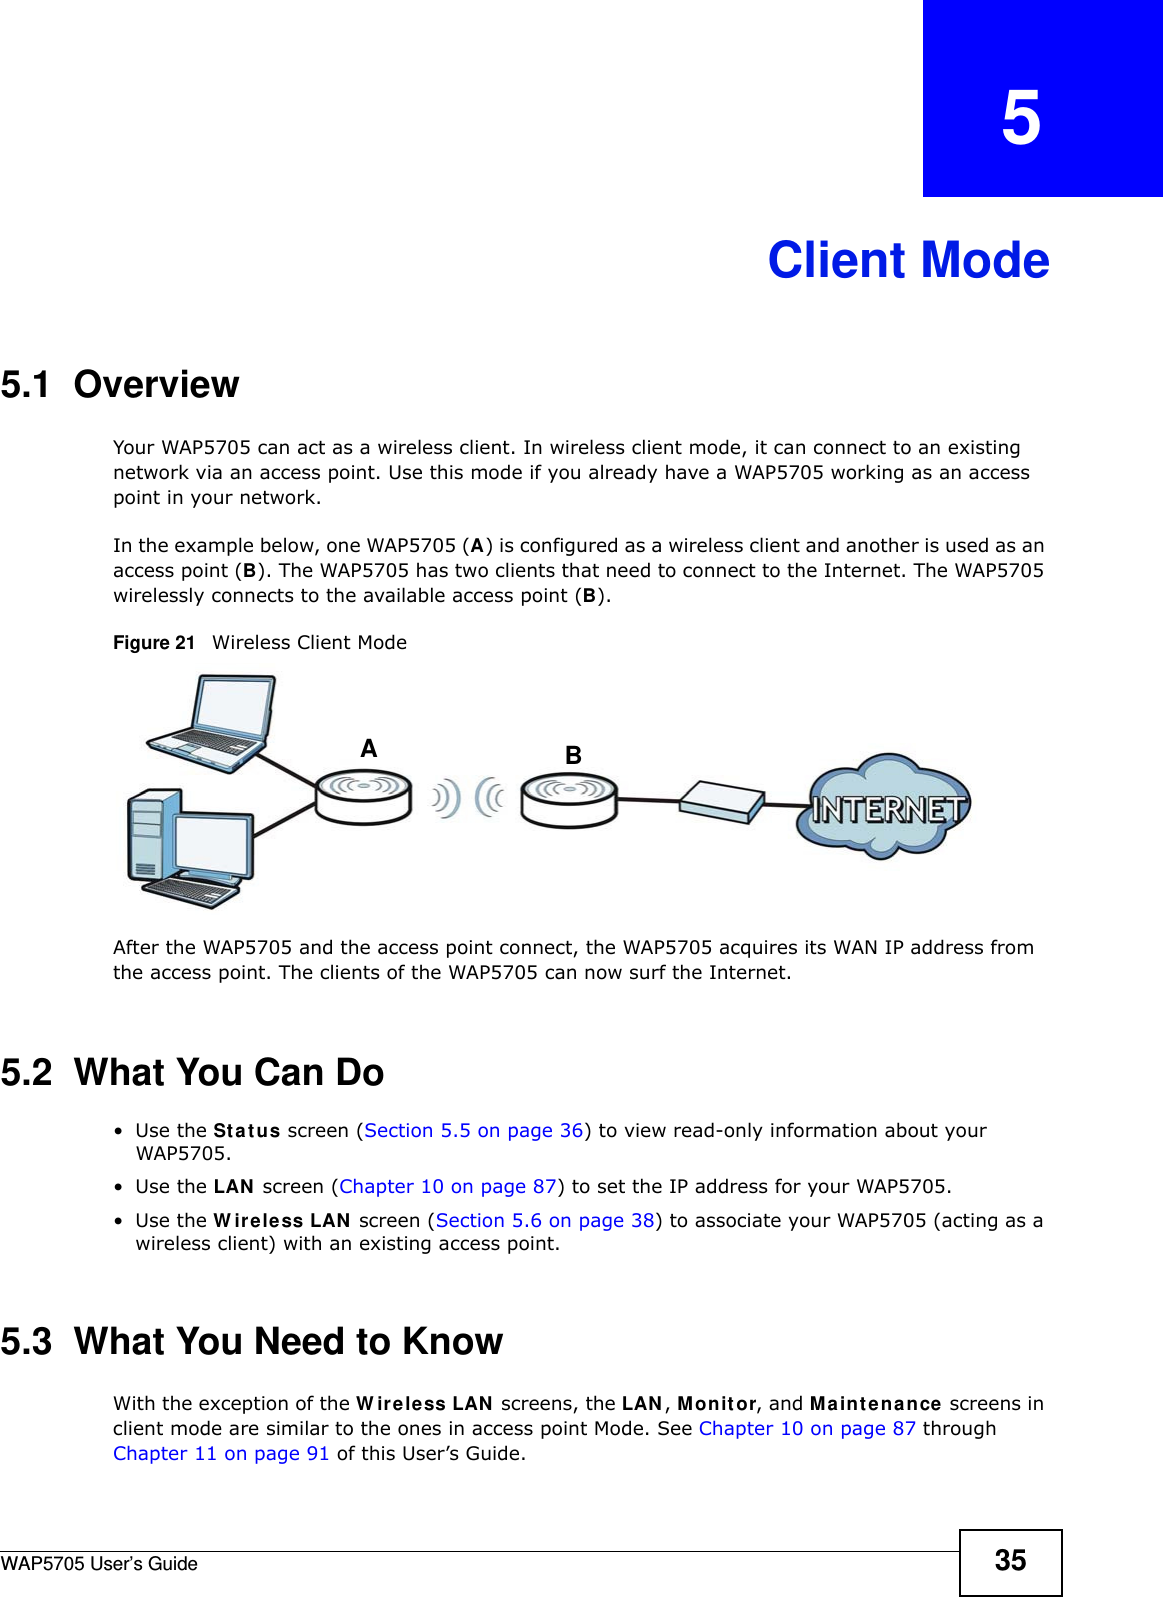 WAP5705 User’s Guide 35CHAPTER   5Client Mode5.1  OverviewYour WAP5705 can act as a wireless client. In wireless client mode, it can connect to an existing network via an access point. Use this mode if you already have a WAP5705 working as an access point in your network.In the example below, one WAP5705 (A) is configured as a wireless client and another is used as an access point (B). The WAP5705 has two clients that need to connect to the Internet. The WAP5705 wirelessly connects to the available access point (B). Figure 21   Wireless Client ModeAfter the WAP5705 and the access point connect, the WAP5705 acquires its WAN IP address from the access point. The clients of the WAP5705 can now surf the Internet. 5.2  What You Can Do•Use the St a t us screen (Section 5.5 on page 36) to view read-only information about your WAP5705.•Use the LAN  screen (Chapter 10 on page 87) to set the IP address for your WAP5705.•Use the W ire less LAN  screen (Section 5.6 on page 38) to associate your WAP5705 (acting as a wireless client) with an existing access point.5.3  What You Need to KnowWith the exception of the W ireless LAN  screens, the LAN , M on it or, and Ma in t e na nce screens in client mode are similar to the ones in access point Mode. See Chapter 10 on page 87 through Chapter 11 on page 91 of this User’s Guide.AB